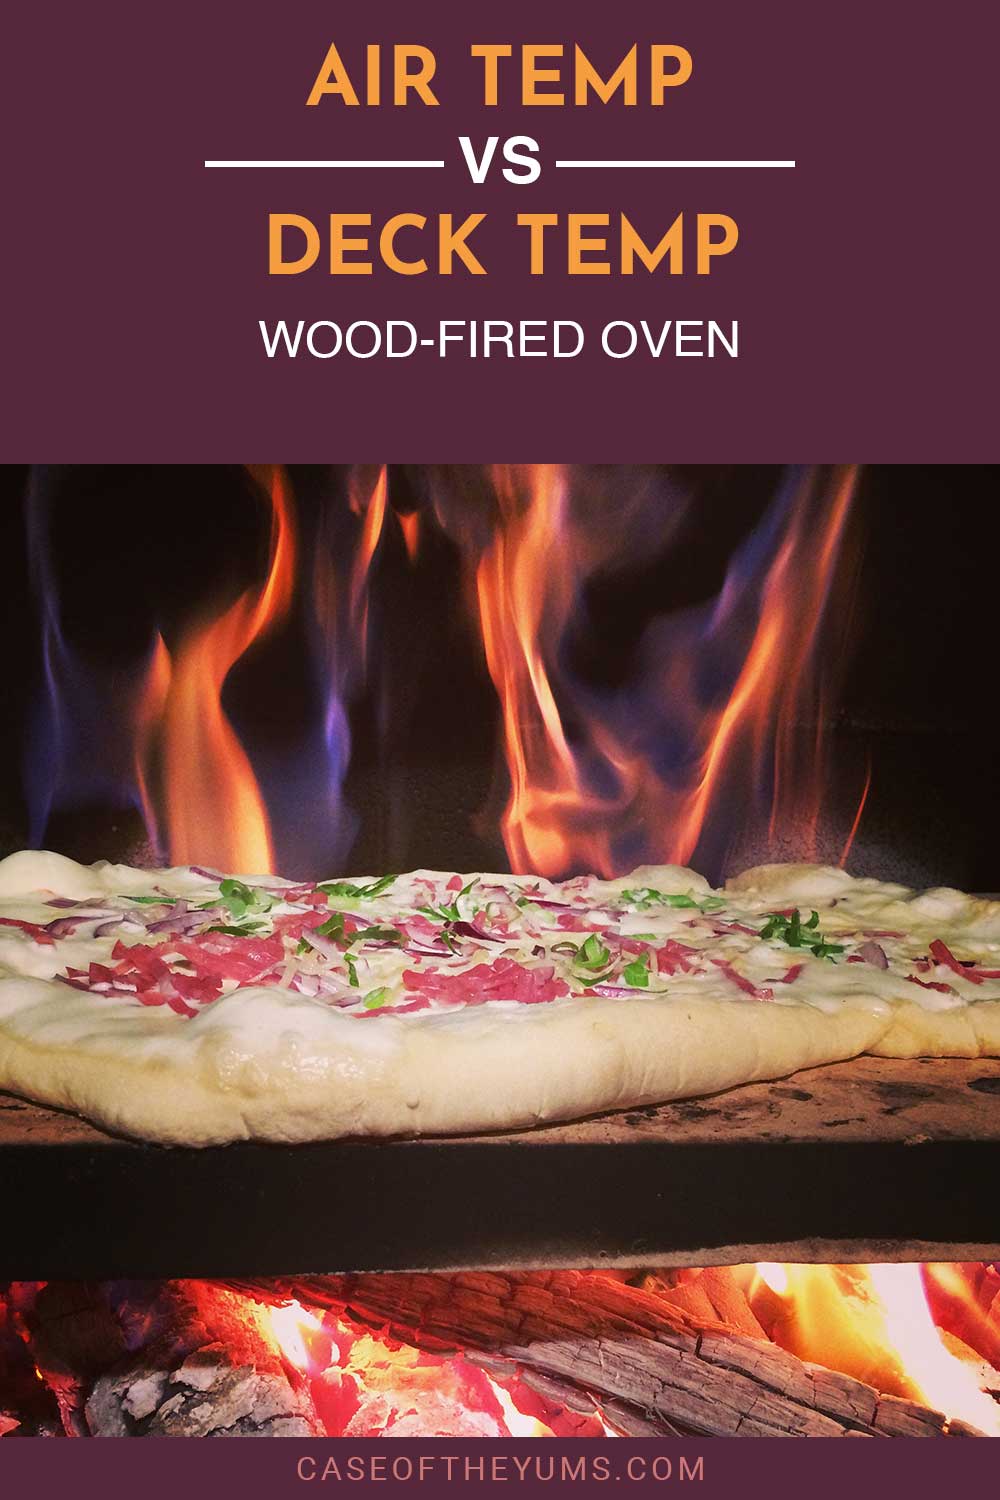 Pizzas on a wood plank over fire - Air Temp vs. Deck Temp Wood-Fired Oven.